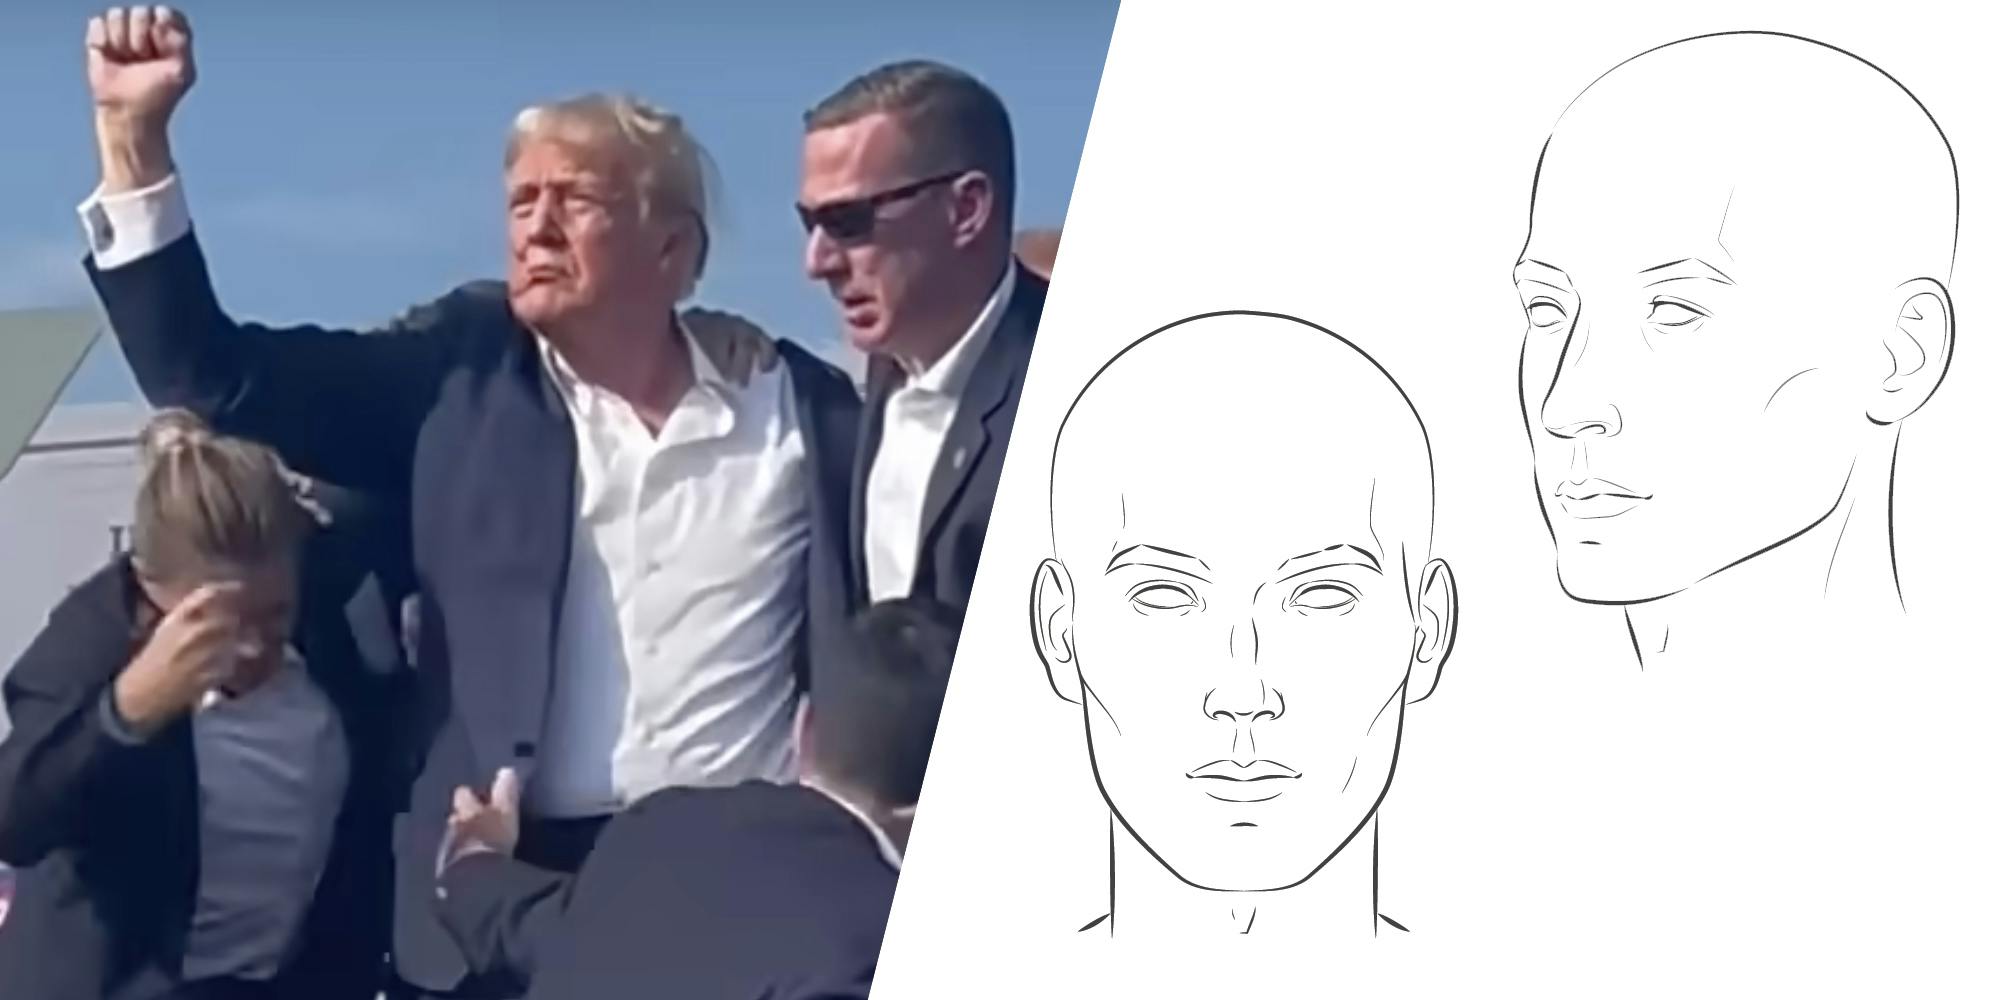 Donald Trump with fist in the air(l), Generic face drawings(r)